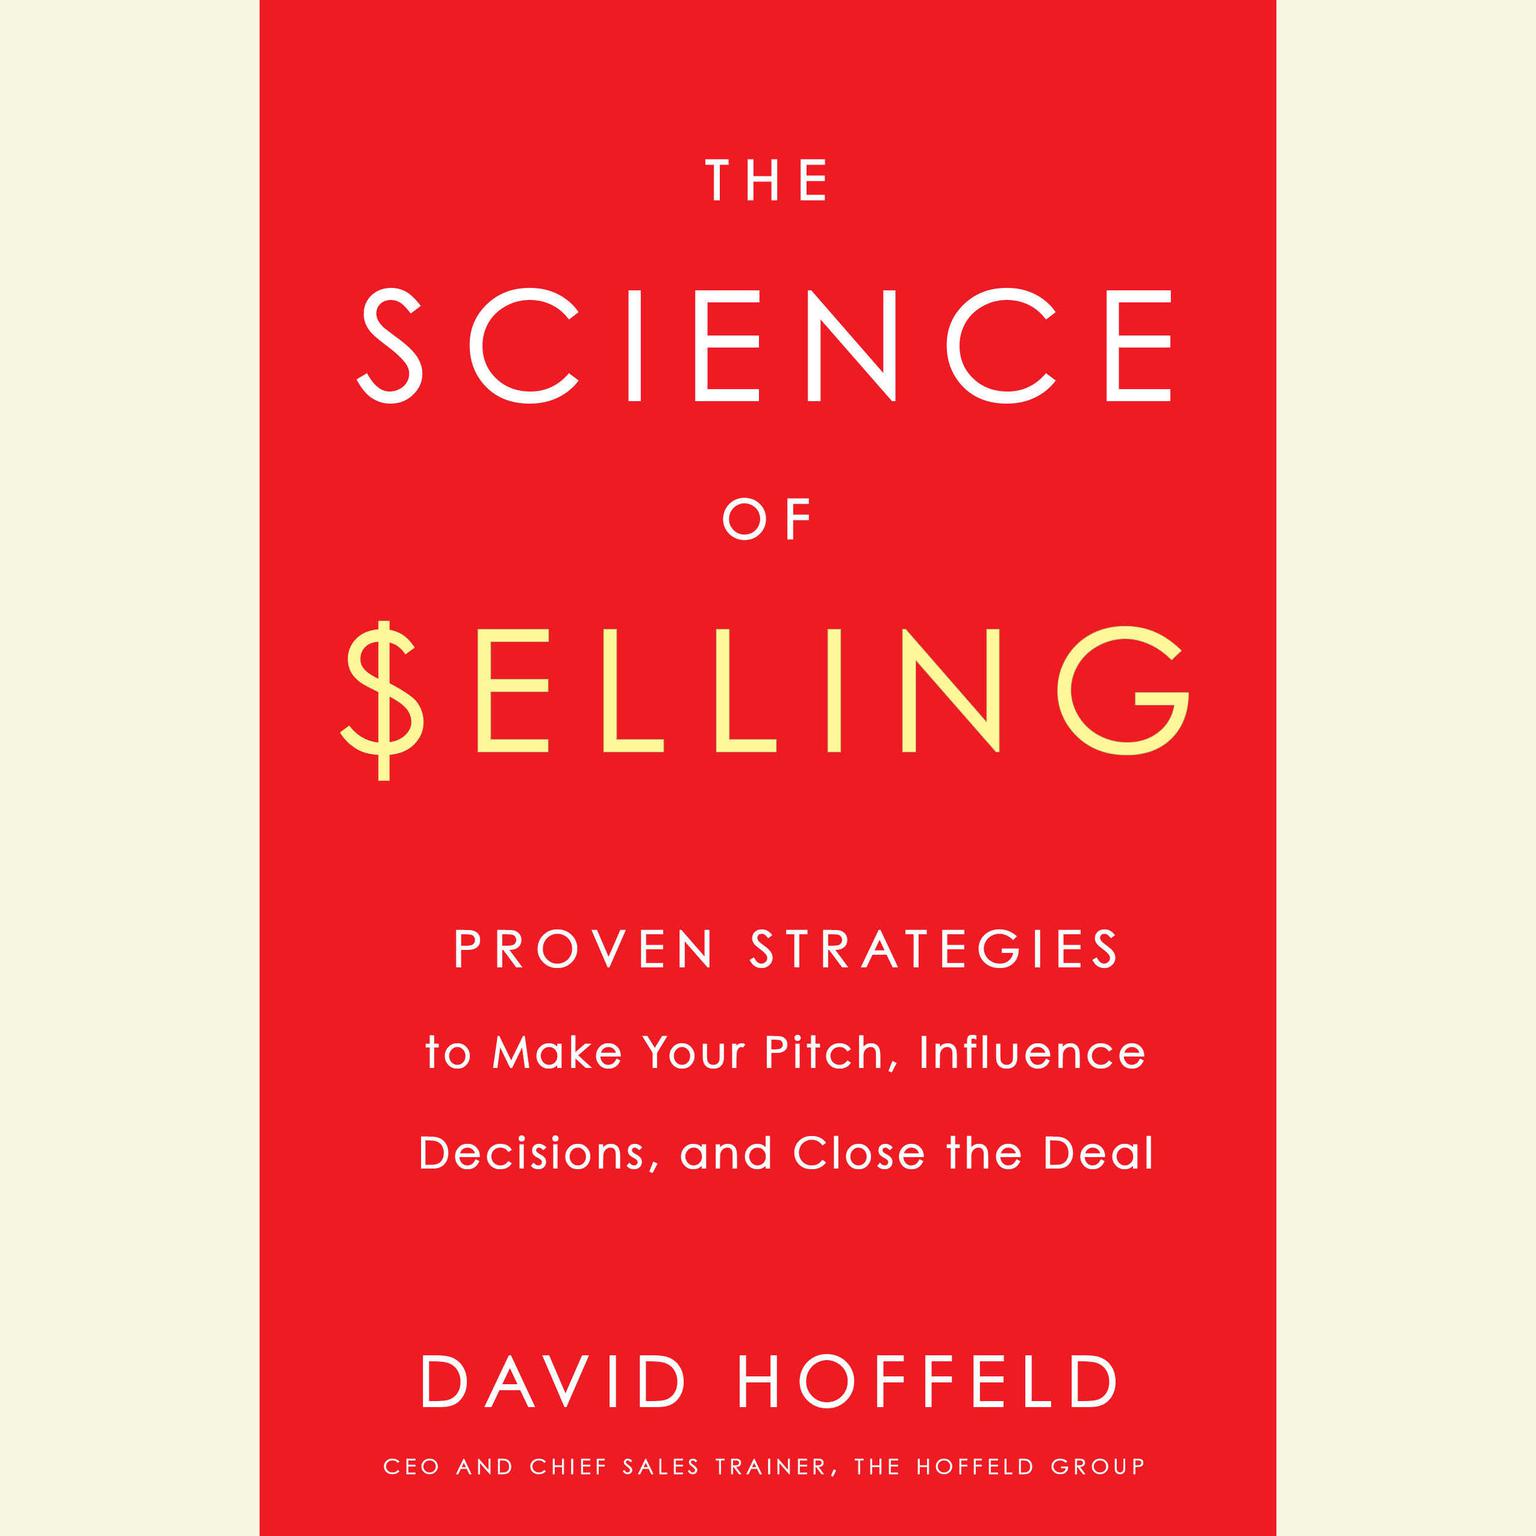 The Science of Selling: Proven Strategies to Make Your Pitch, Influence Decisions, and Close the Deal Audiobook, by David Hoffeld